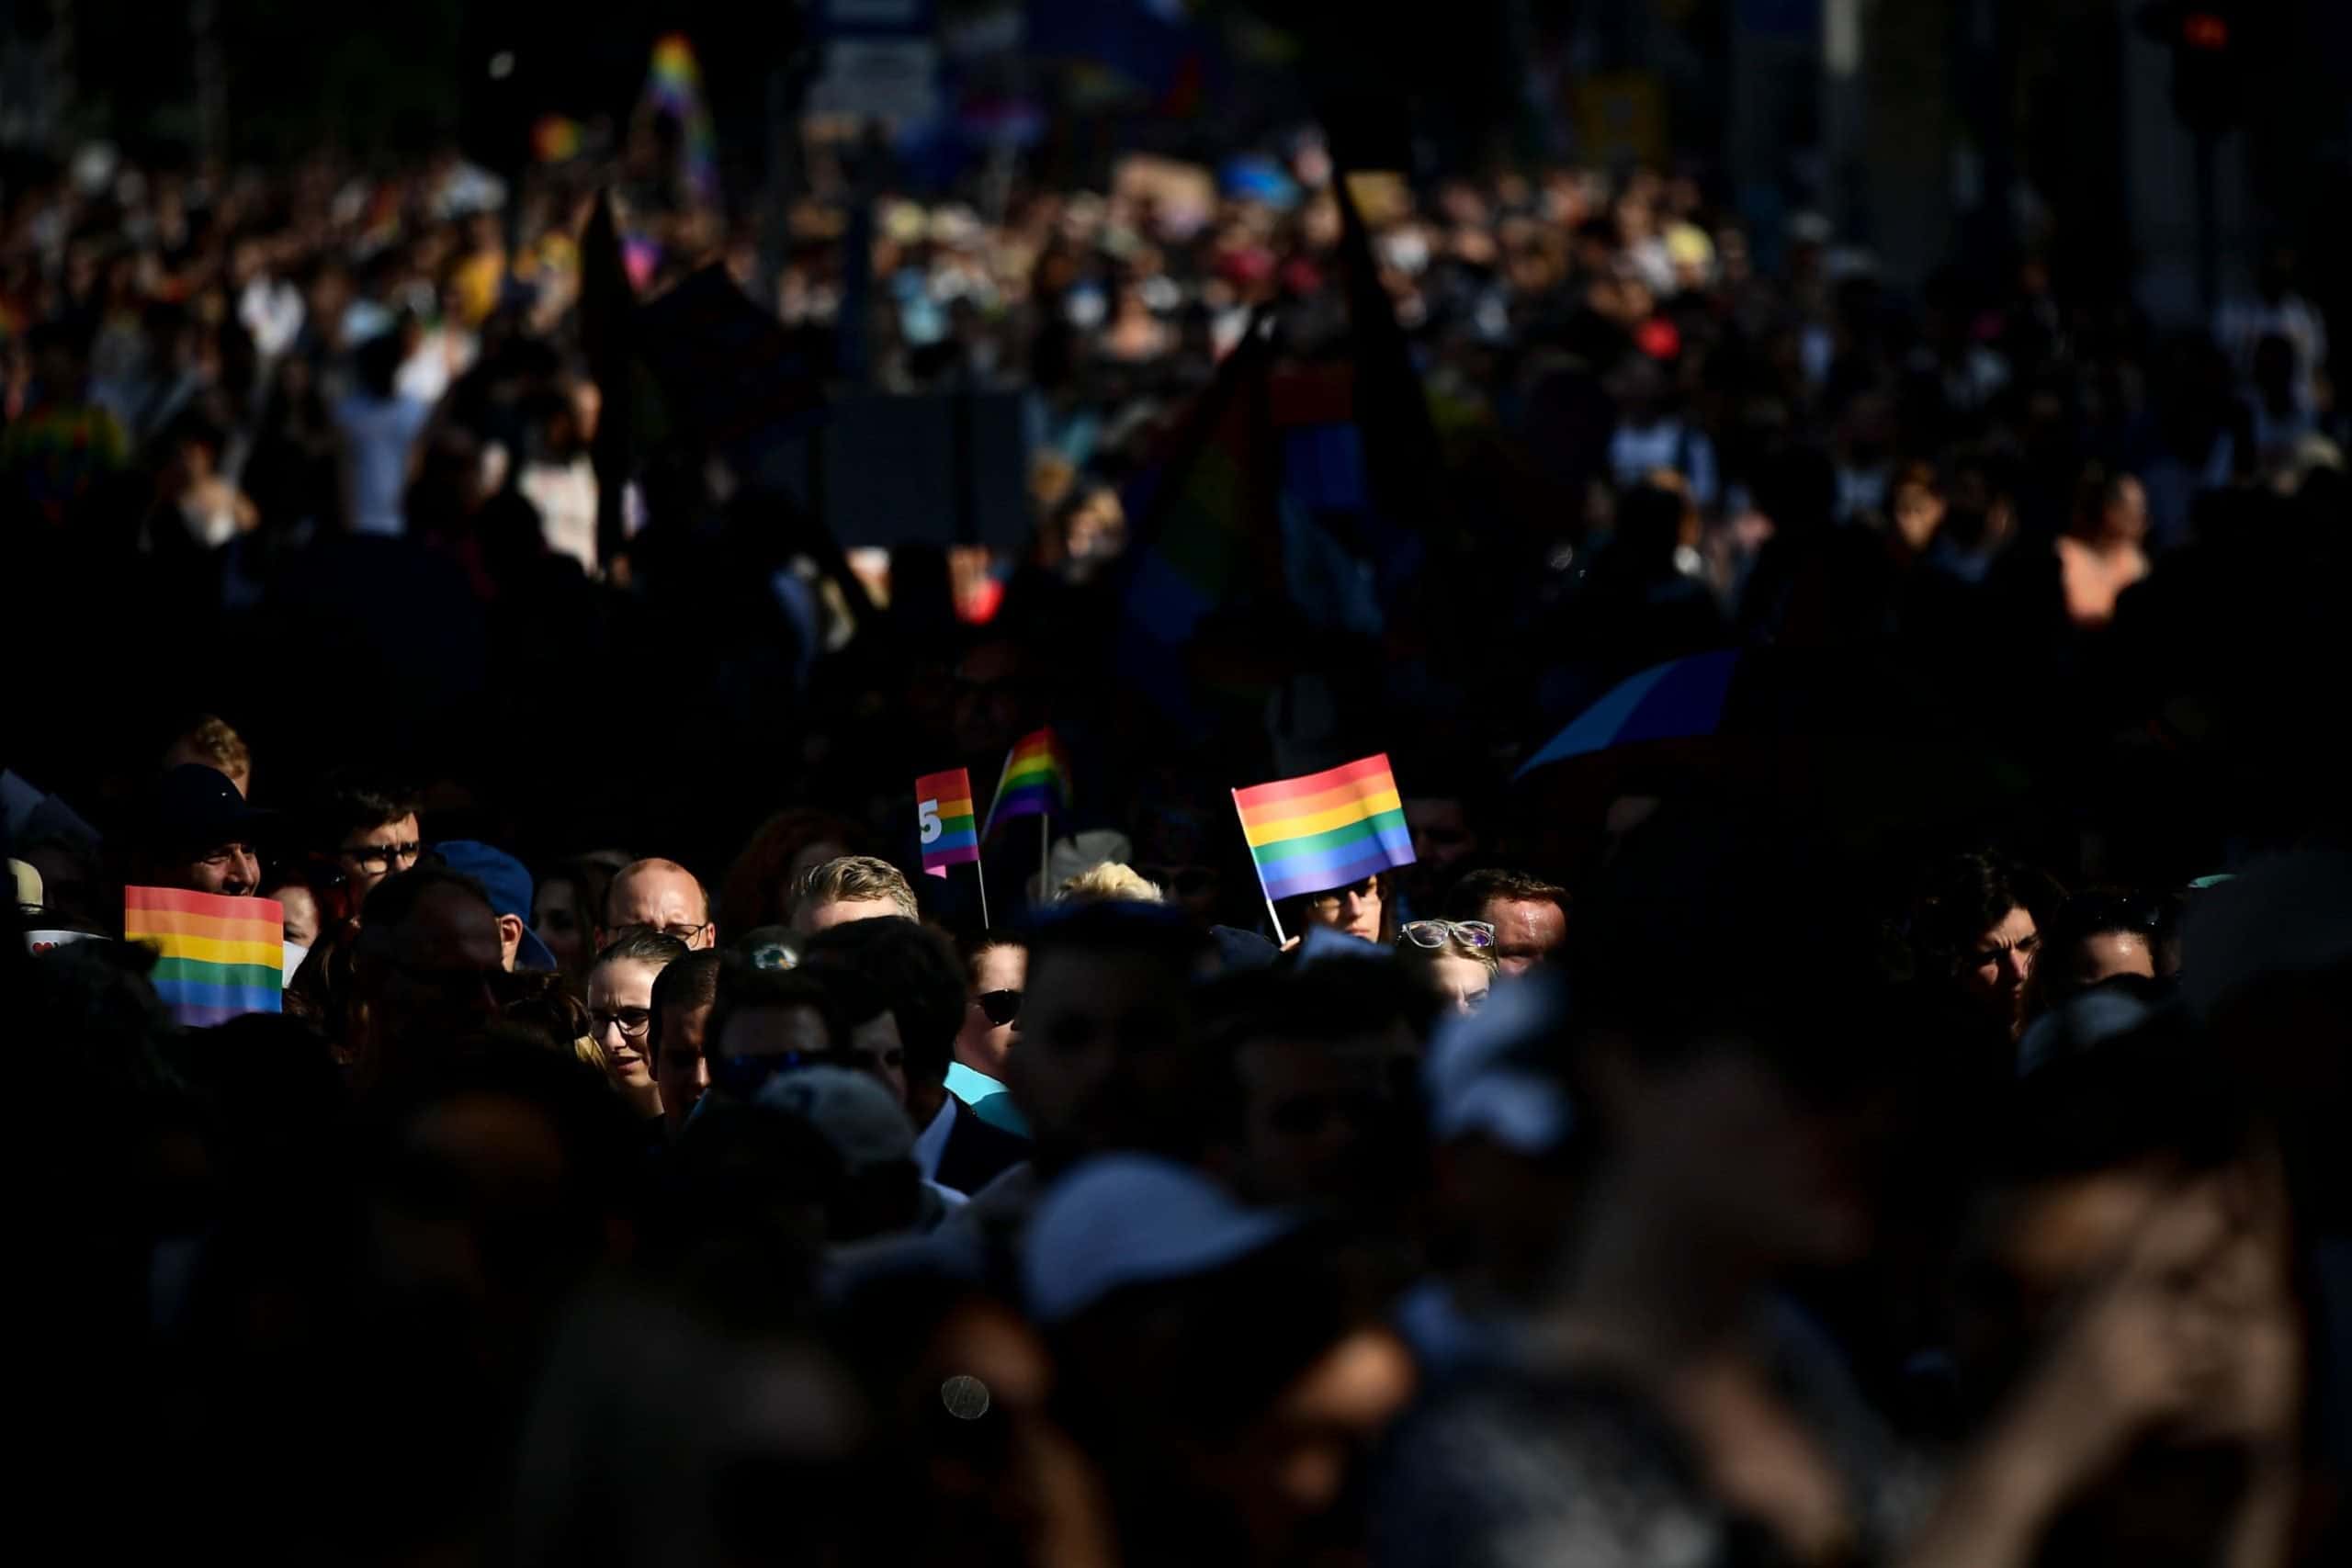 Hungary taken to EU’s highest court over LGBT laws as Russia clamps down further on gay rights